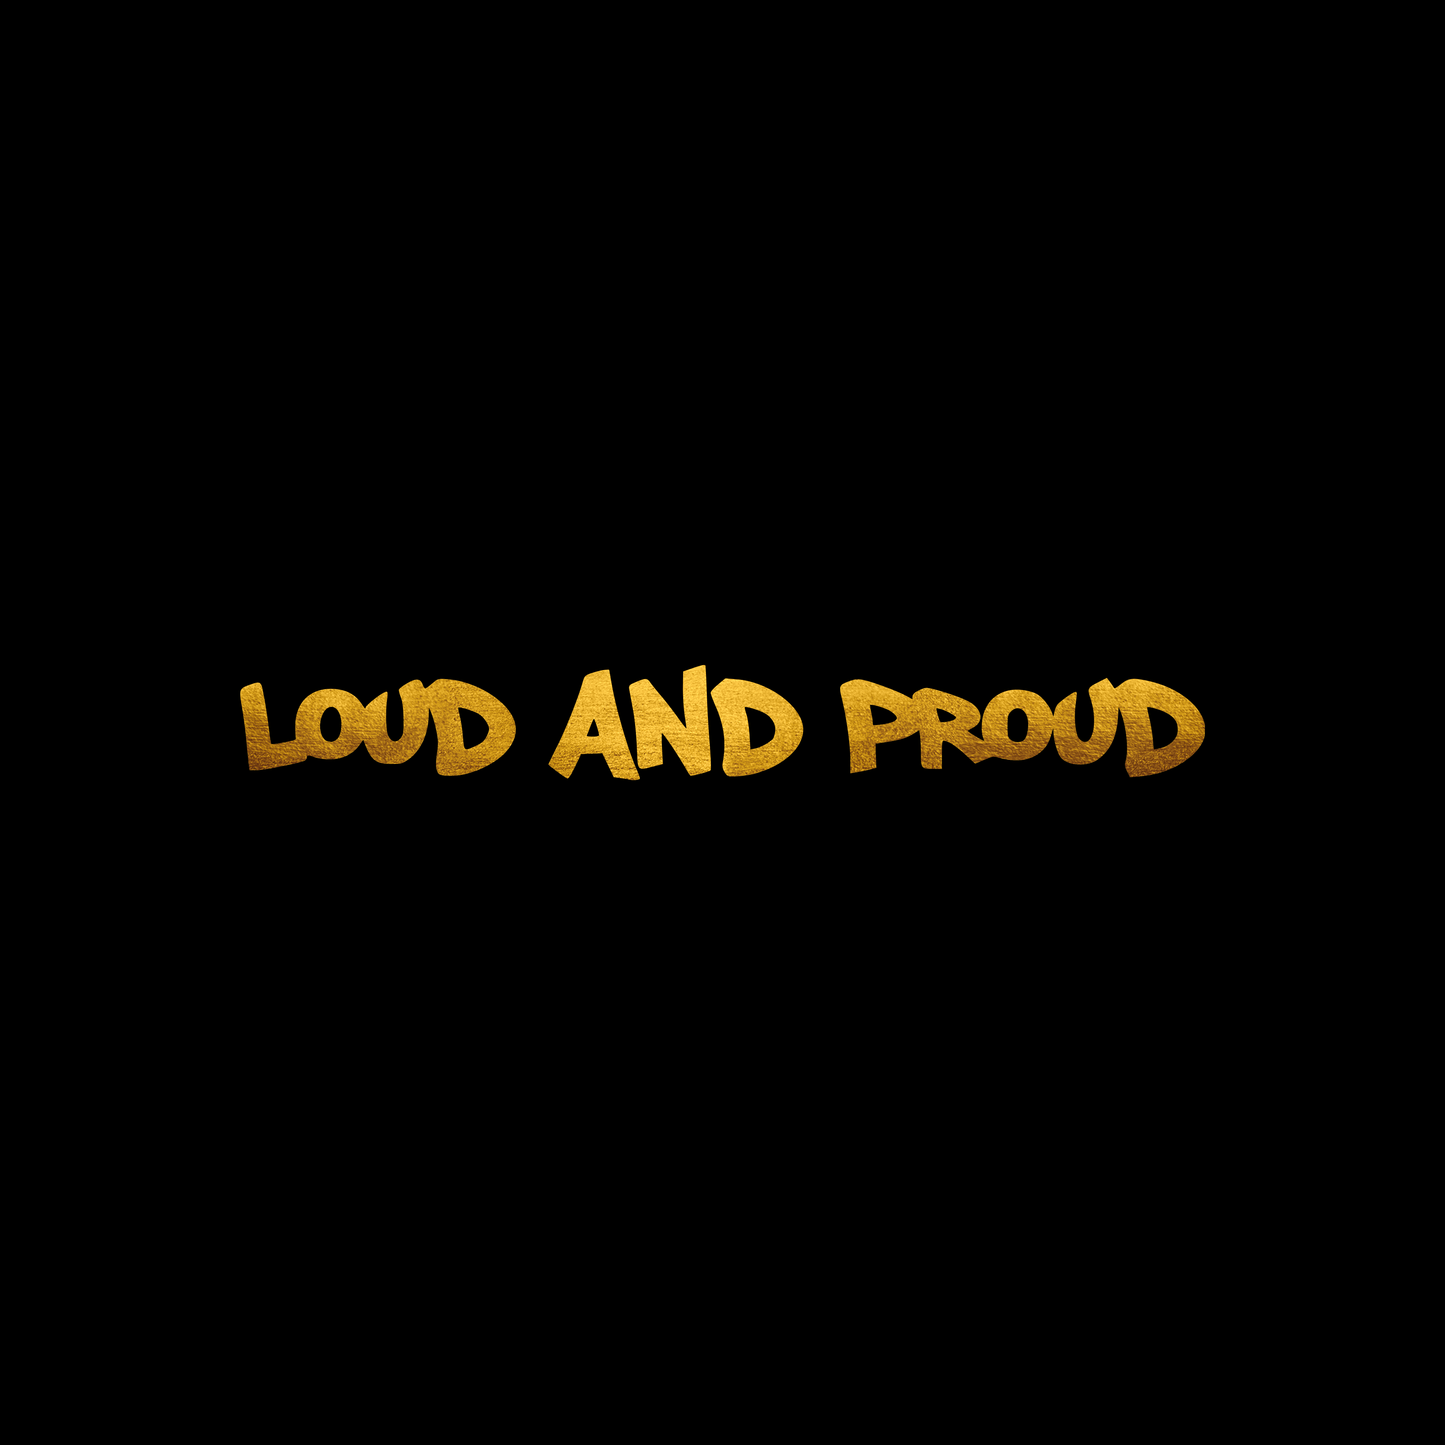 Loud and proud sticker decal